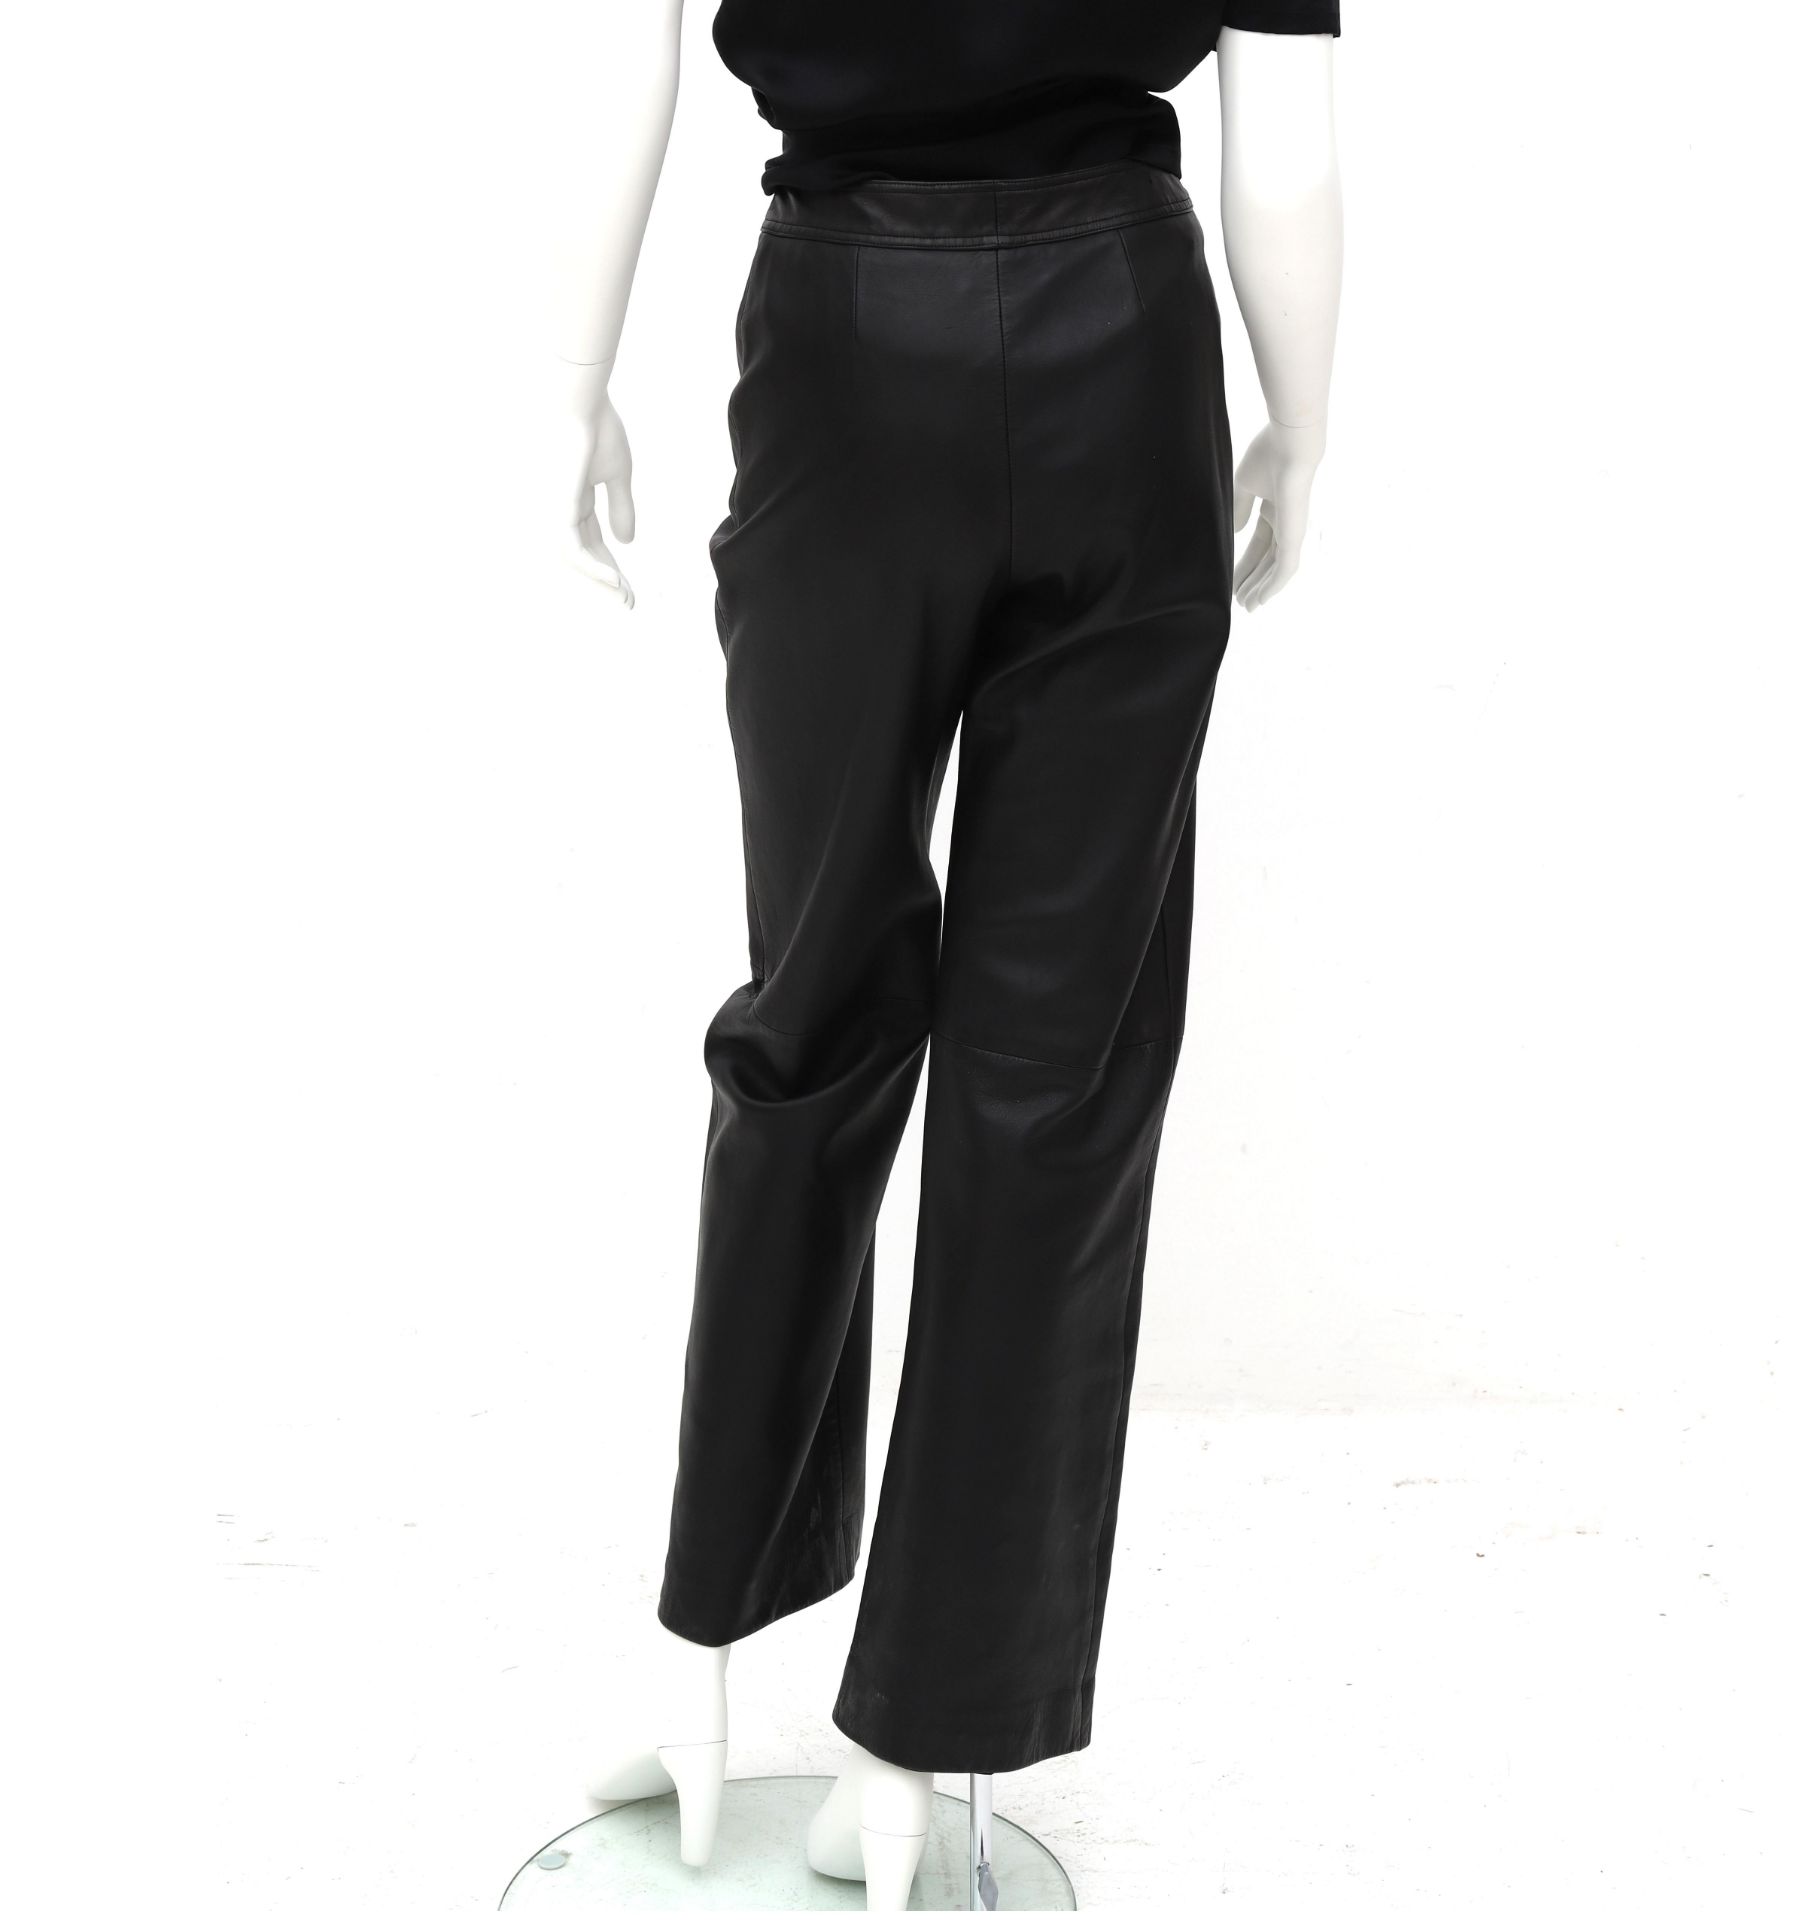 Chanel Boutique black leather pants. The pants have black with gold-colored CC logo buttons at the - Bild 5 aus 6